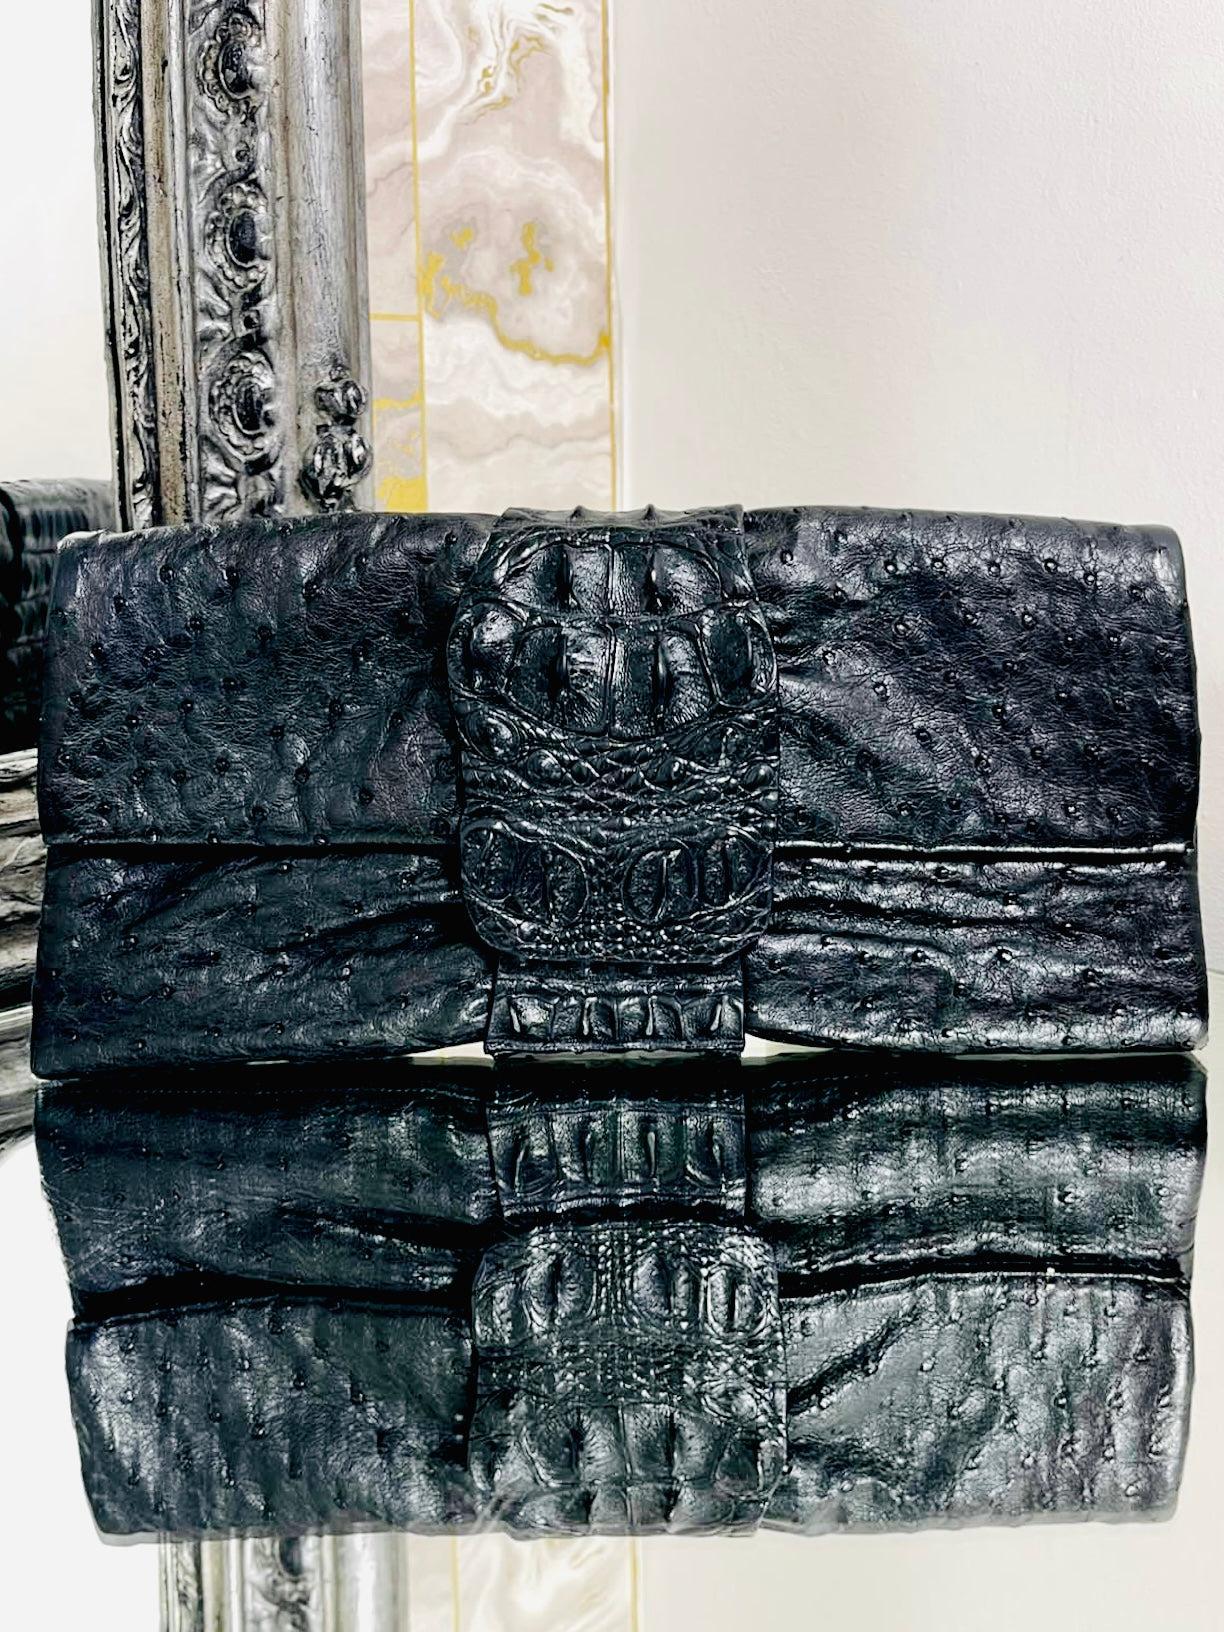 Viva La Moda Hand Made Exotic Clutch Bag 

Black Ostrich skin, with a band of Crocodile band with magnetic closure and bright yellow leather lining.

Additional information:
Size – 30 W x 4 D x 15 H cm
Composition- Ostrich Skin, Crocodile Skin